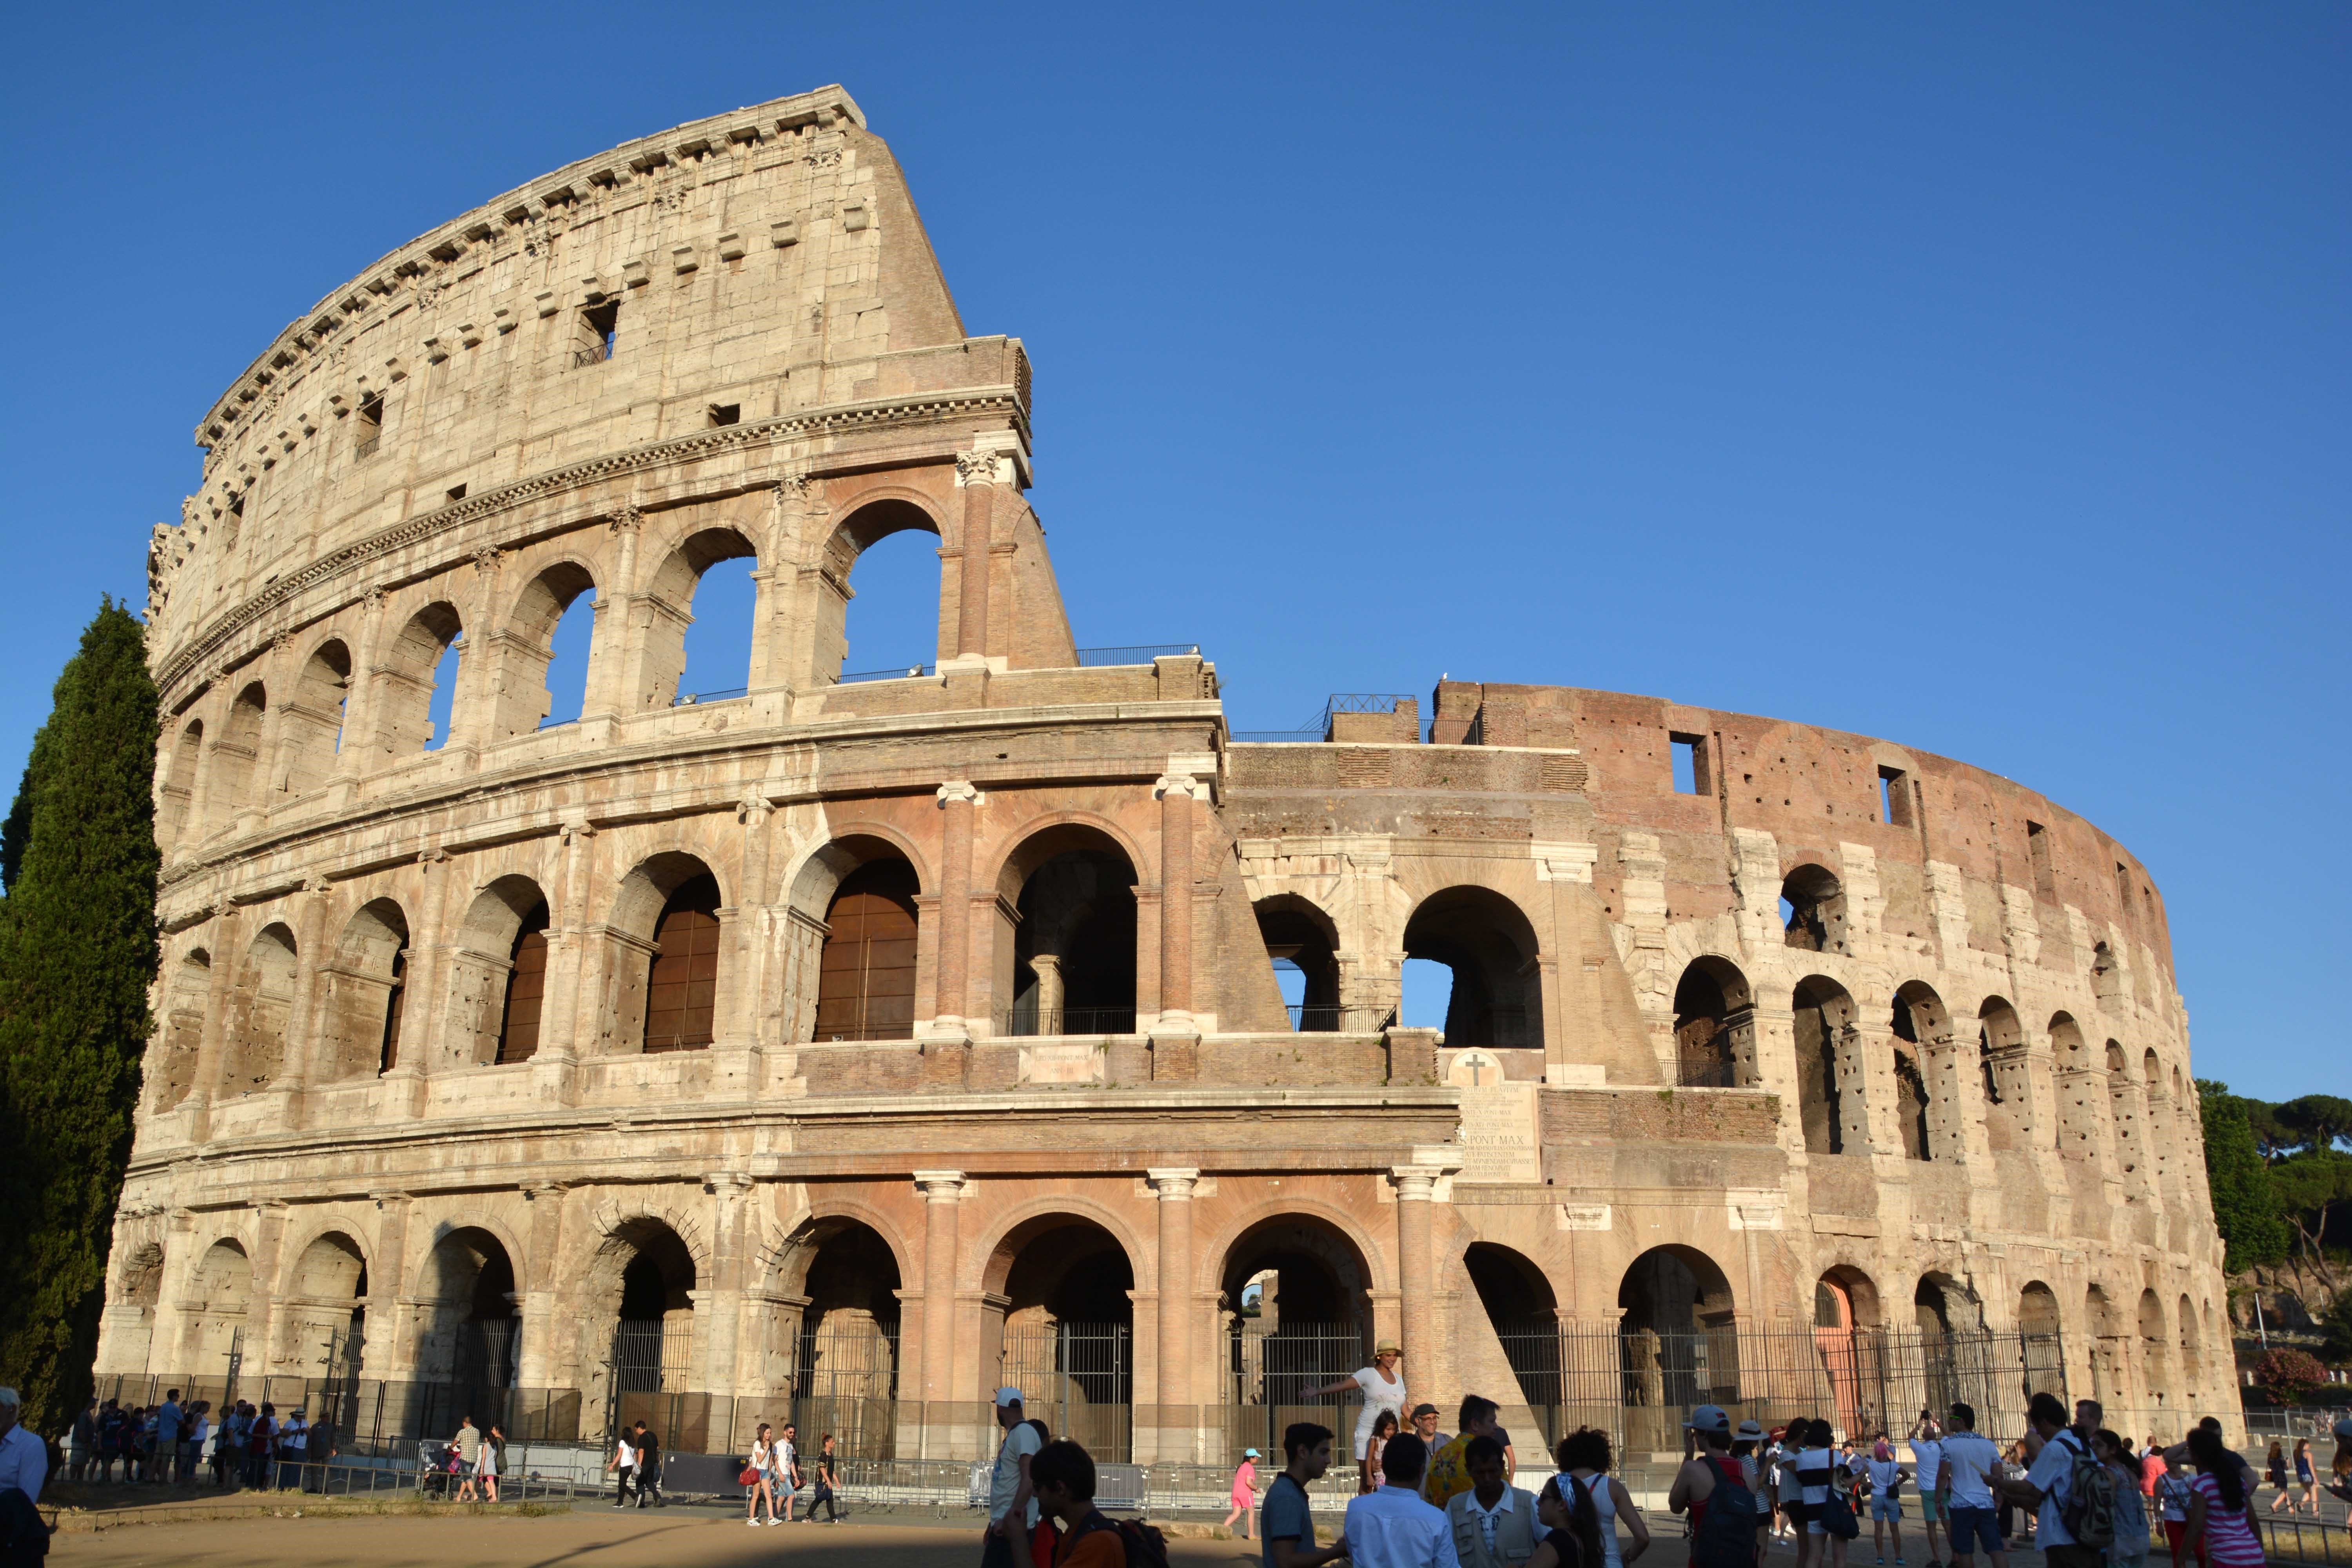 <p><strong>Colosseum</strong></p><p>Imperial Roman</p><p>Rome, Italy</p><p>70-80 CE</p><p>Stone and concrete</p>